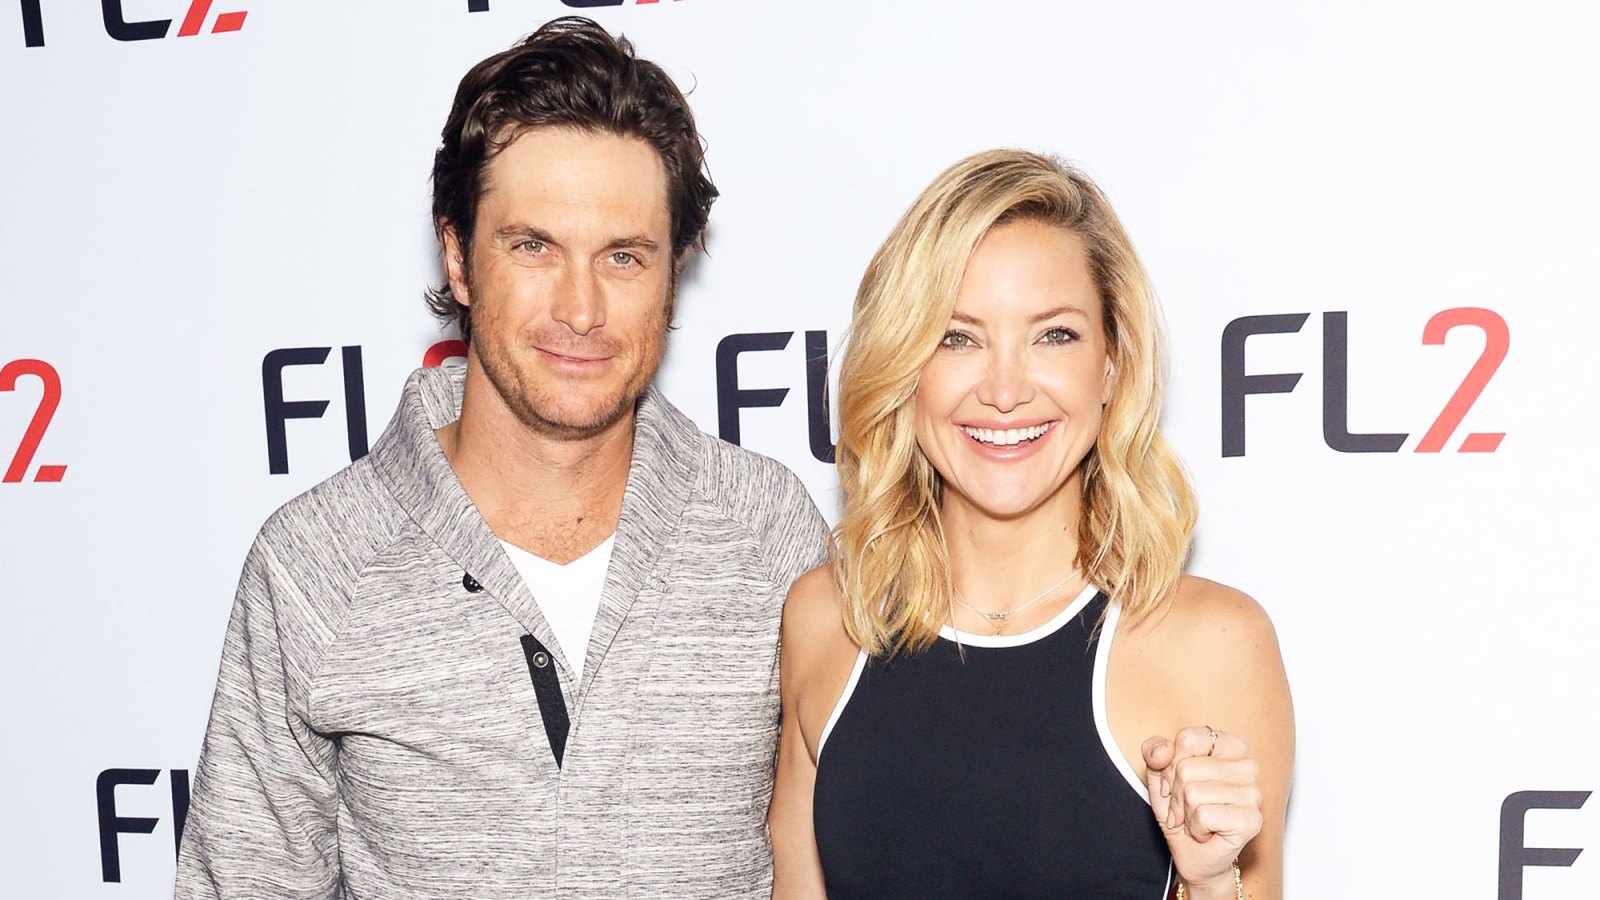 Kate-Hudson-Brother-Oliver-Were-Not-Surprised-by-Dad-Bill-Hudson-Publicly-Disowning-Them-Oliver-Kate-Hudson